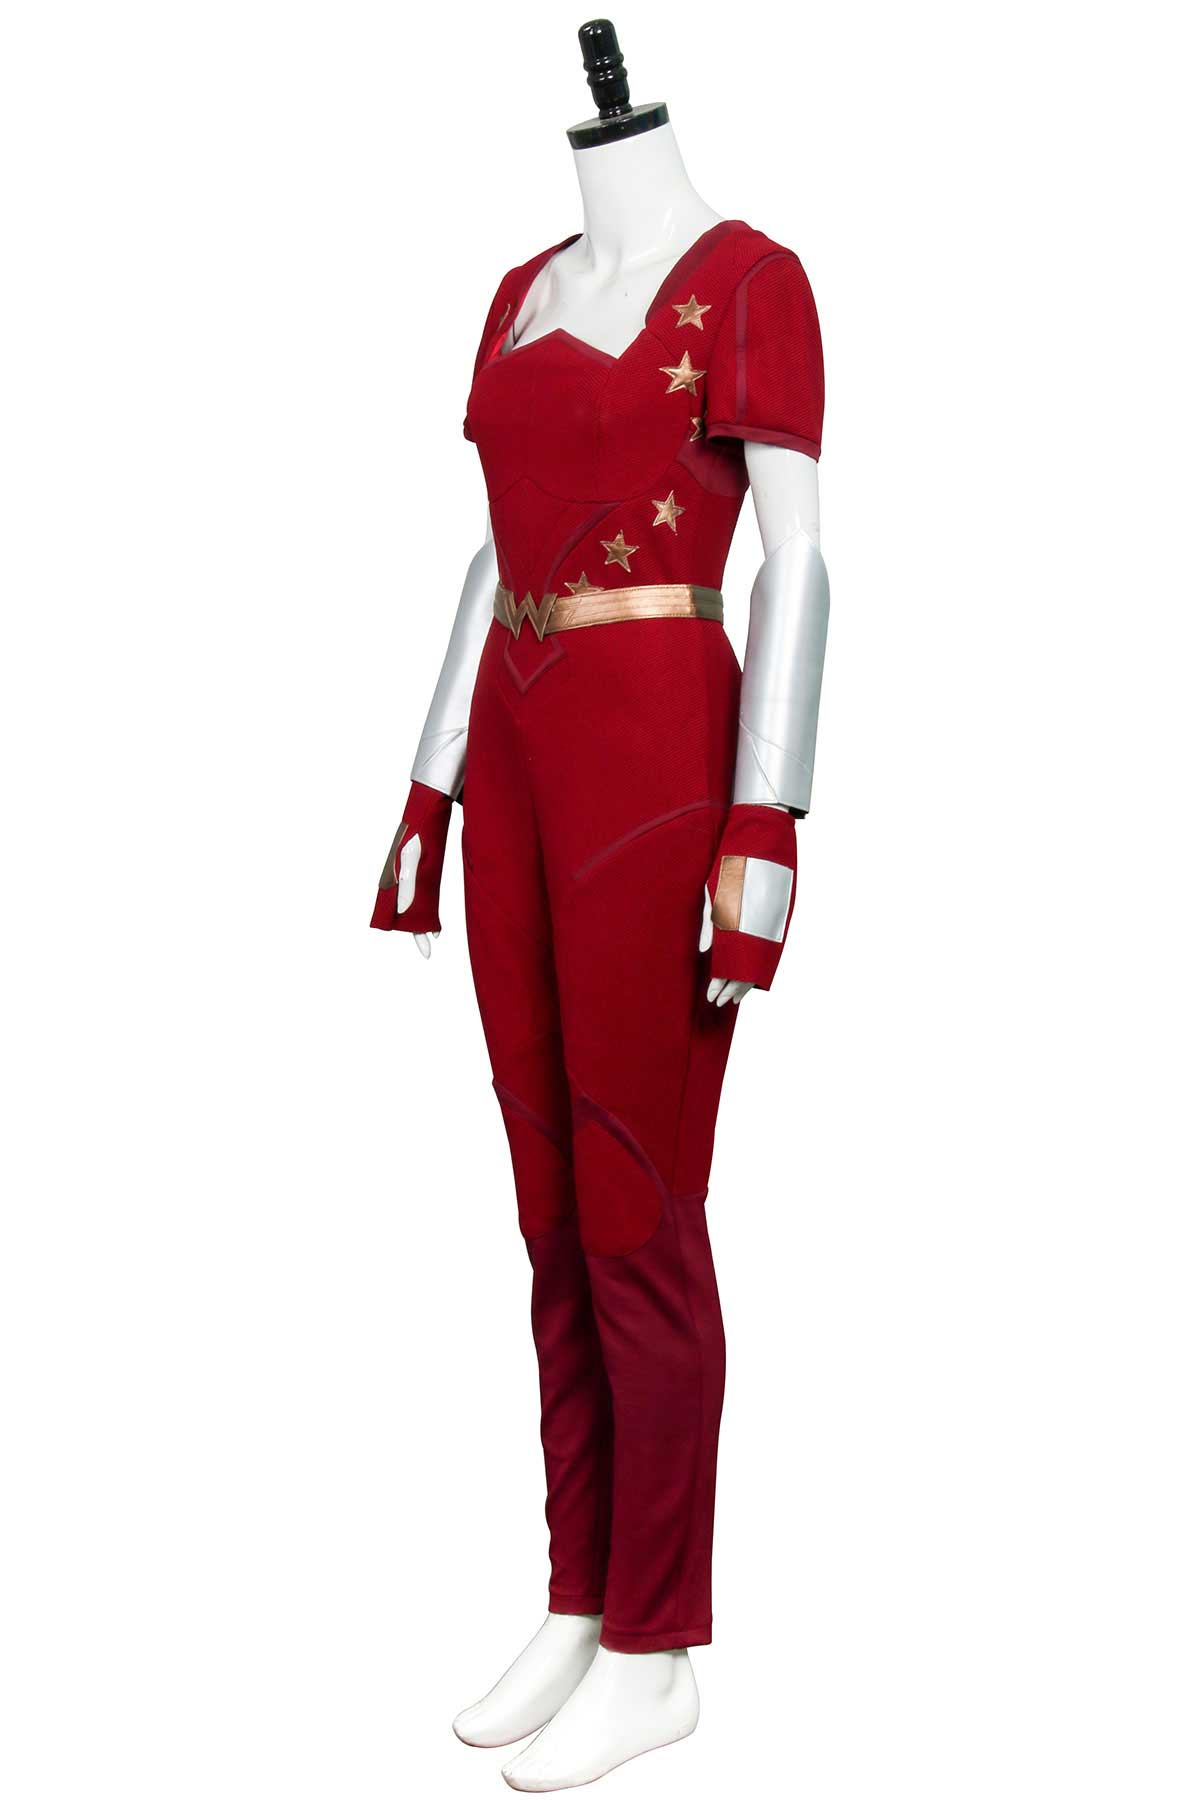 Titans Season 2 Donna Troy Halloween Cosplay Costume Jumpsuit Uniform Outfit-Takerlama